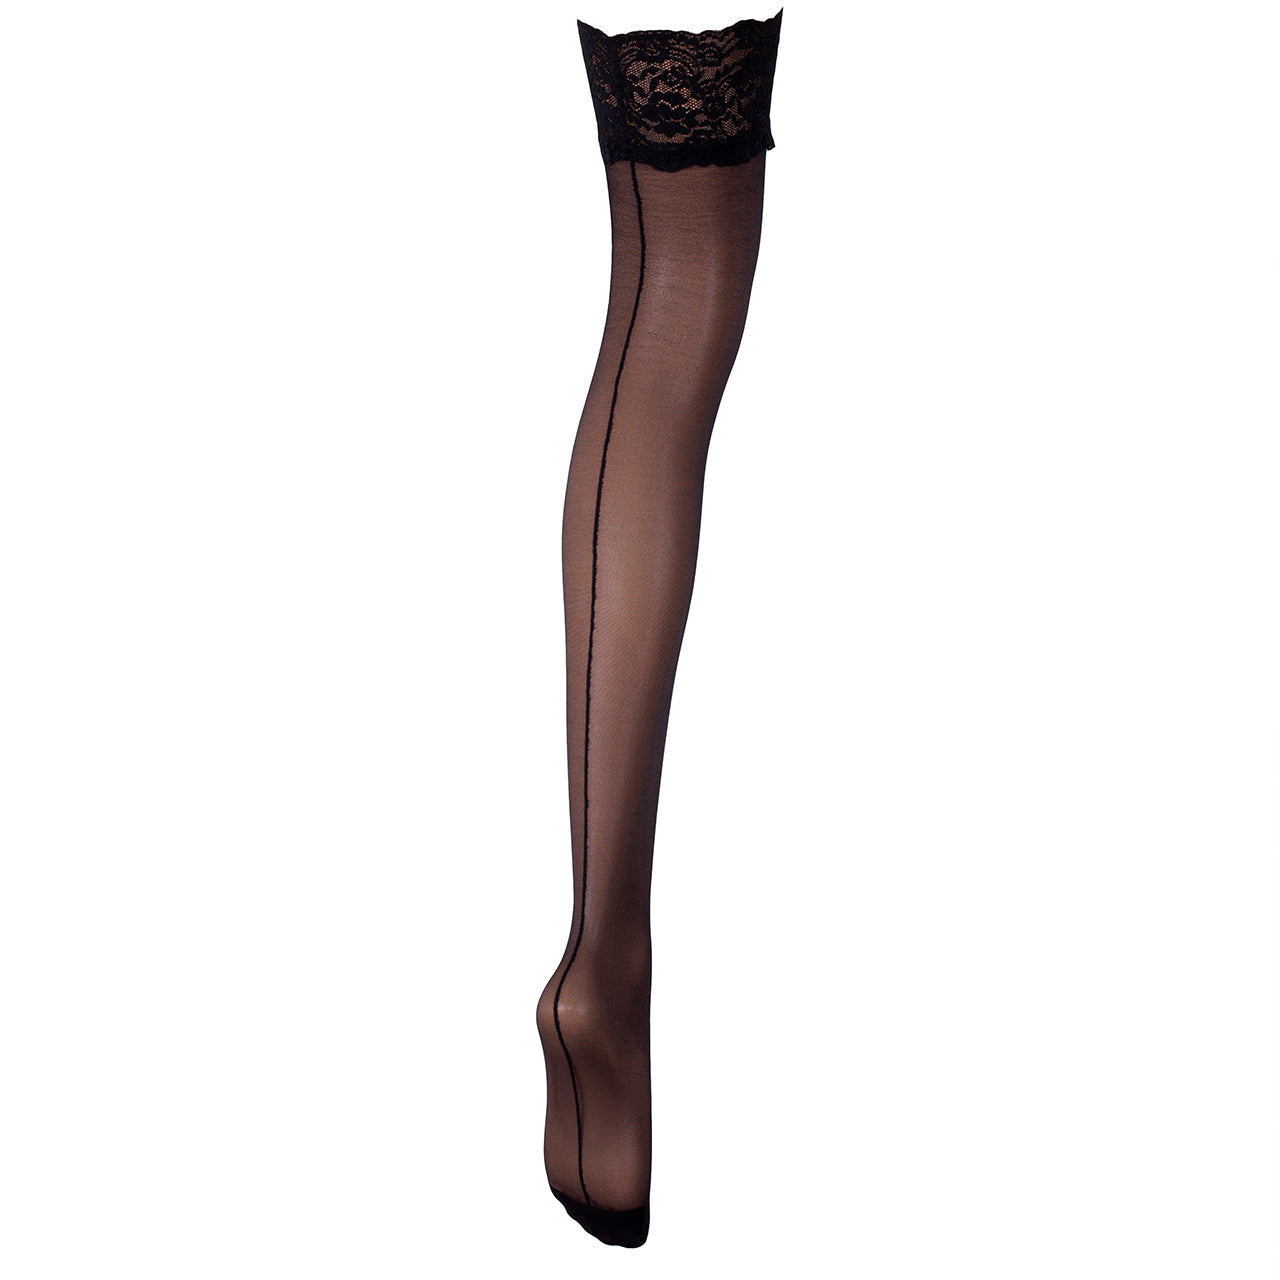 Black Lace Stockings with Back Seam | Bluebella